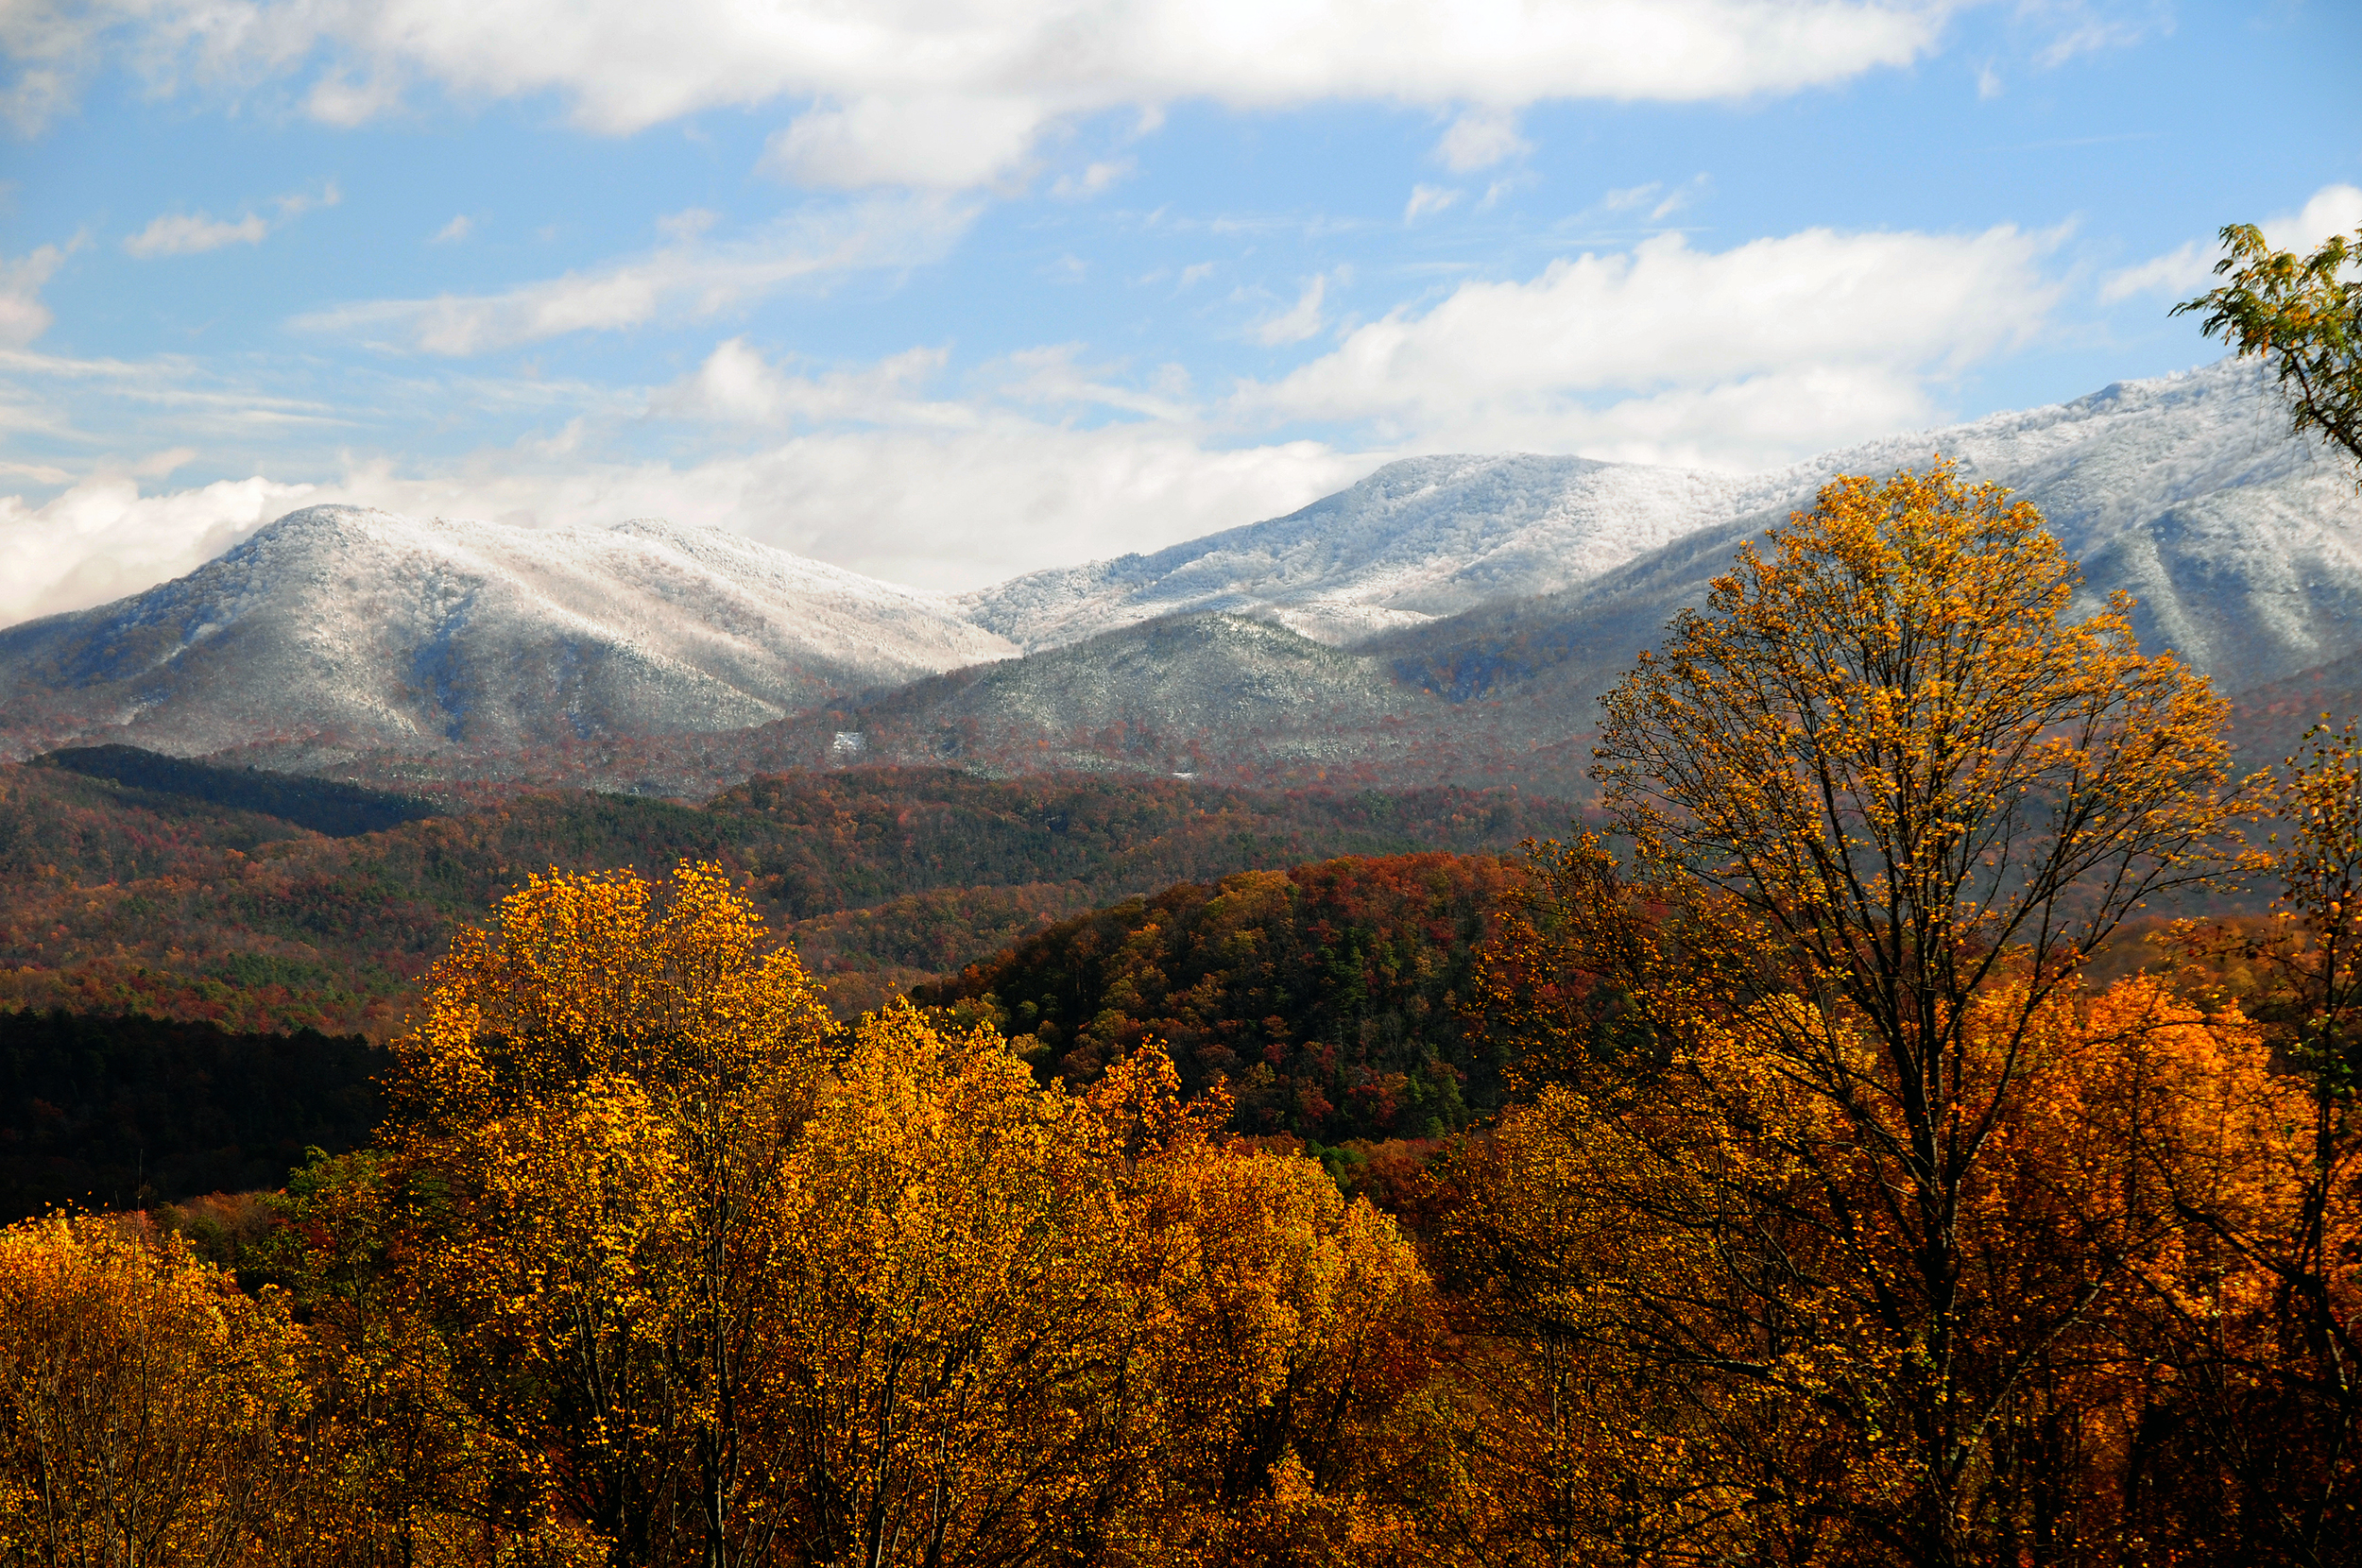 Gold and red fall colors fill the valleys while snow coats the mountain tops.